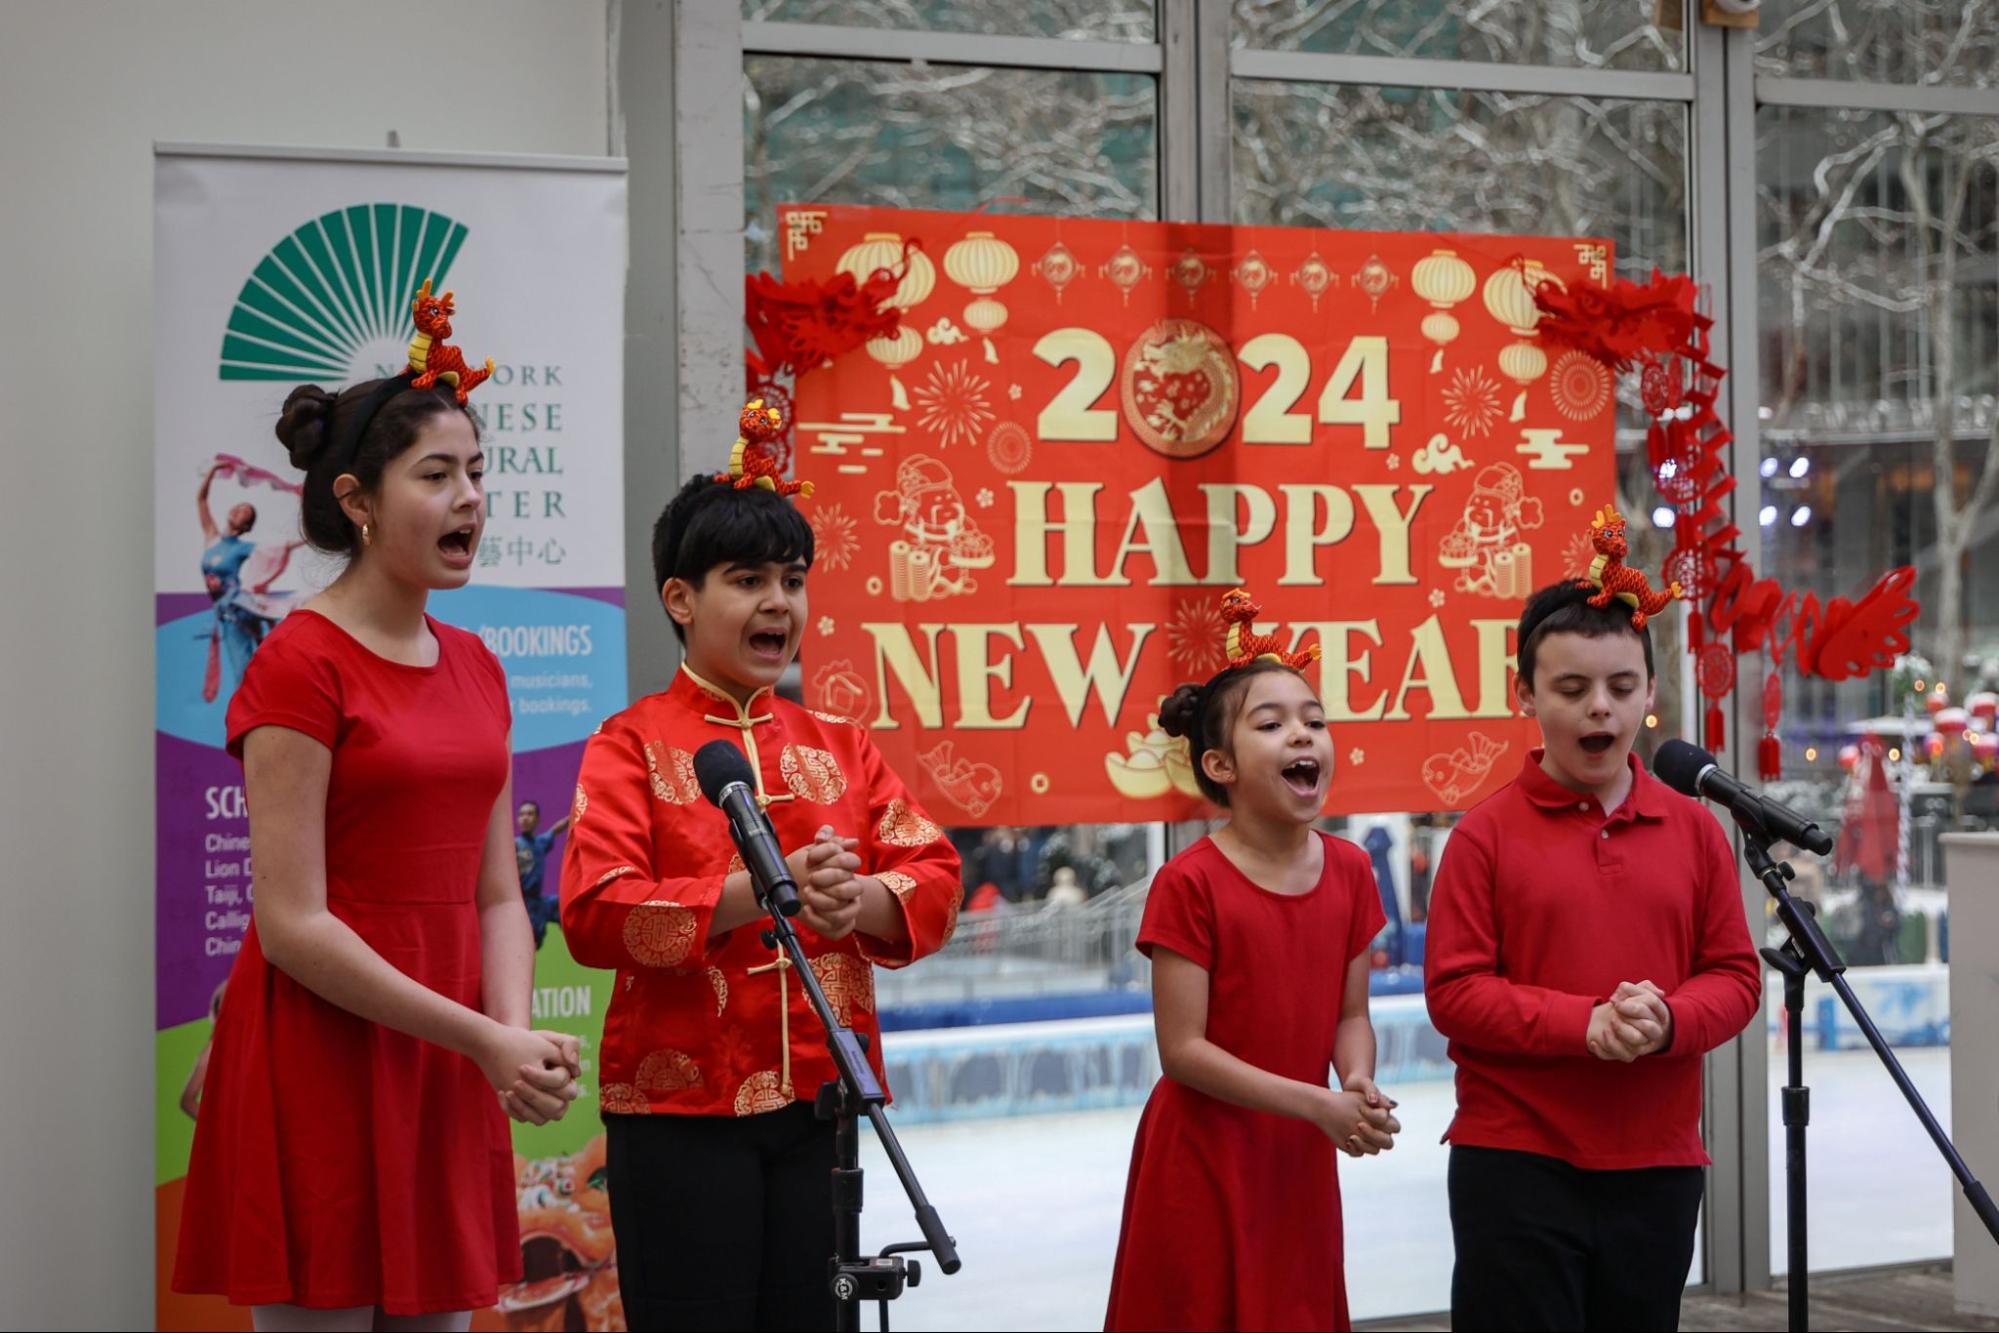 Four children wearing red outfits sing in unison towards a crowd. Behind them is a red poster that says “2024 HAPPY NEW YEAR.”